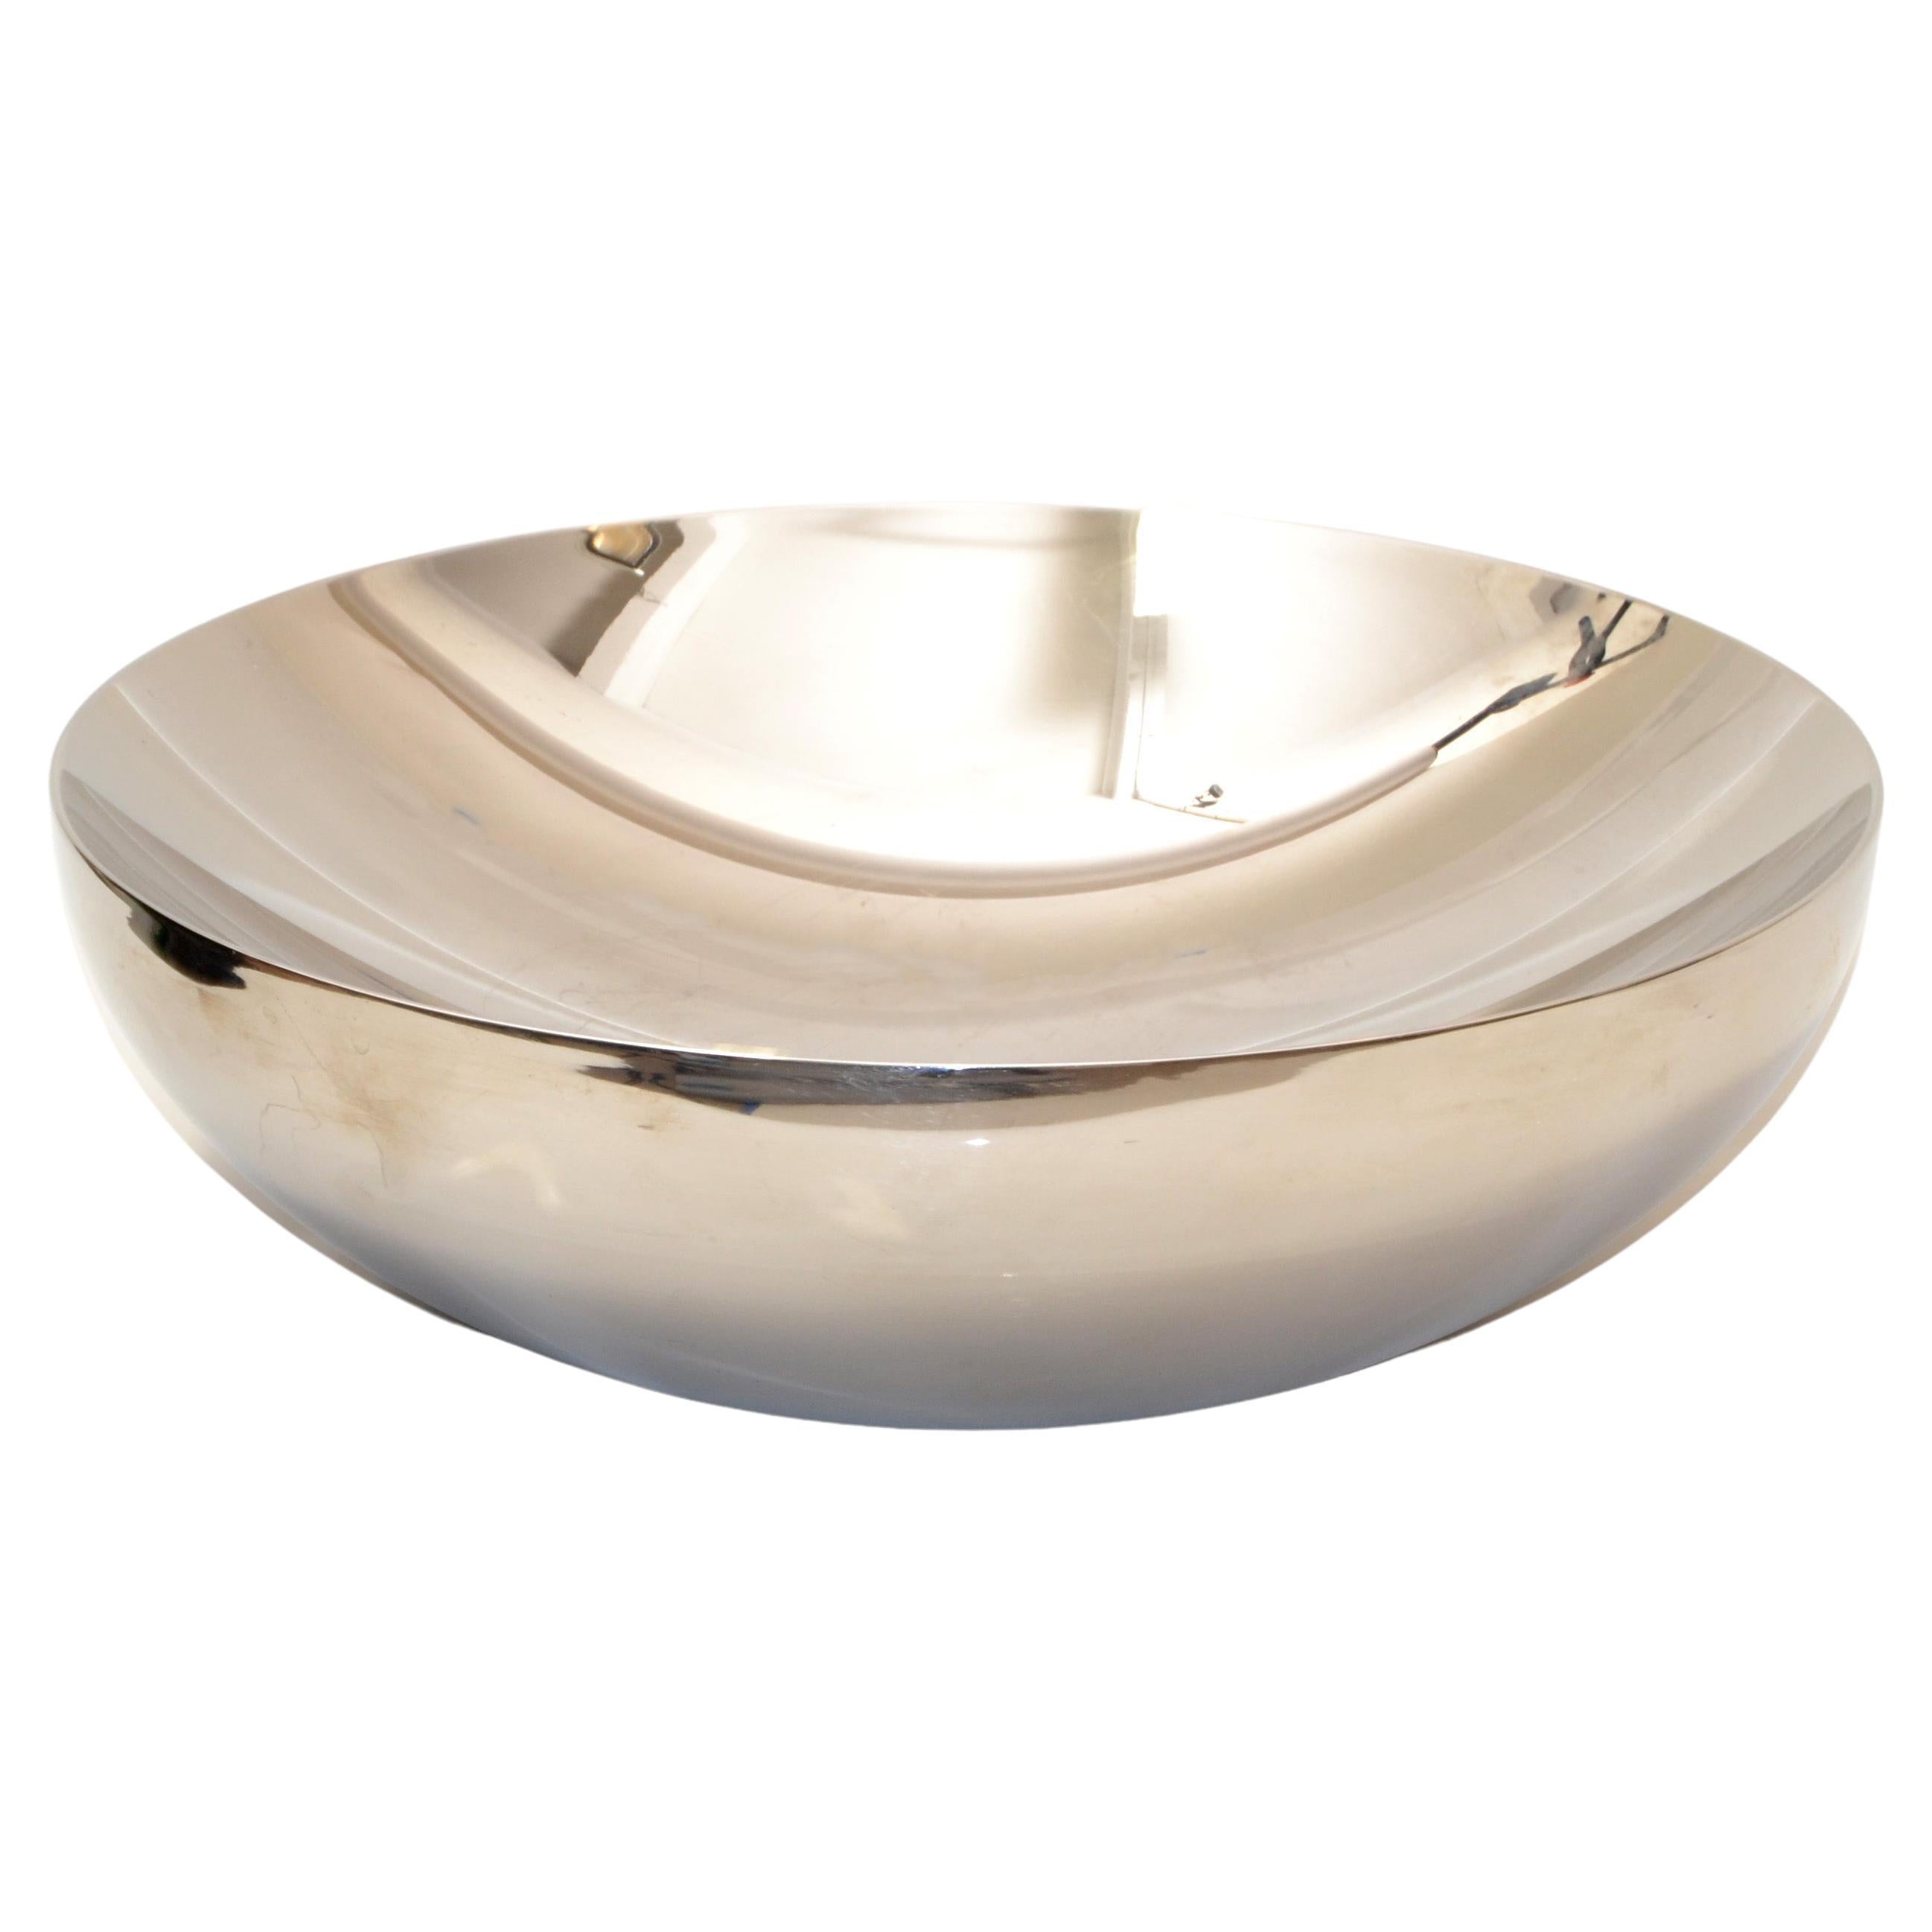 Alessi Durbino Lomazzi Inox 18/10 Stainless Steel Double Wall Serving Bowl Italy